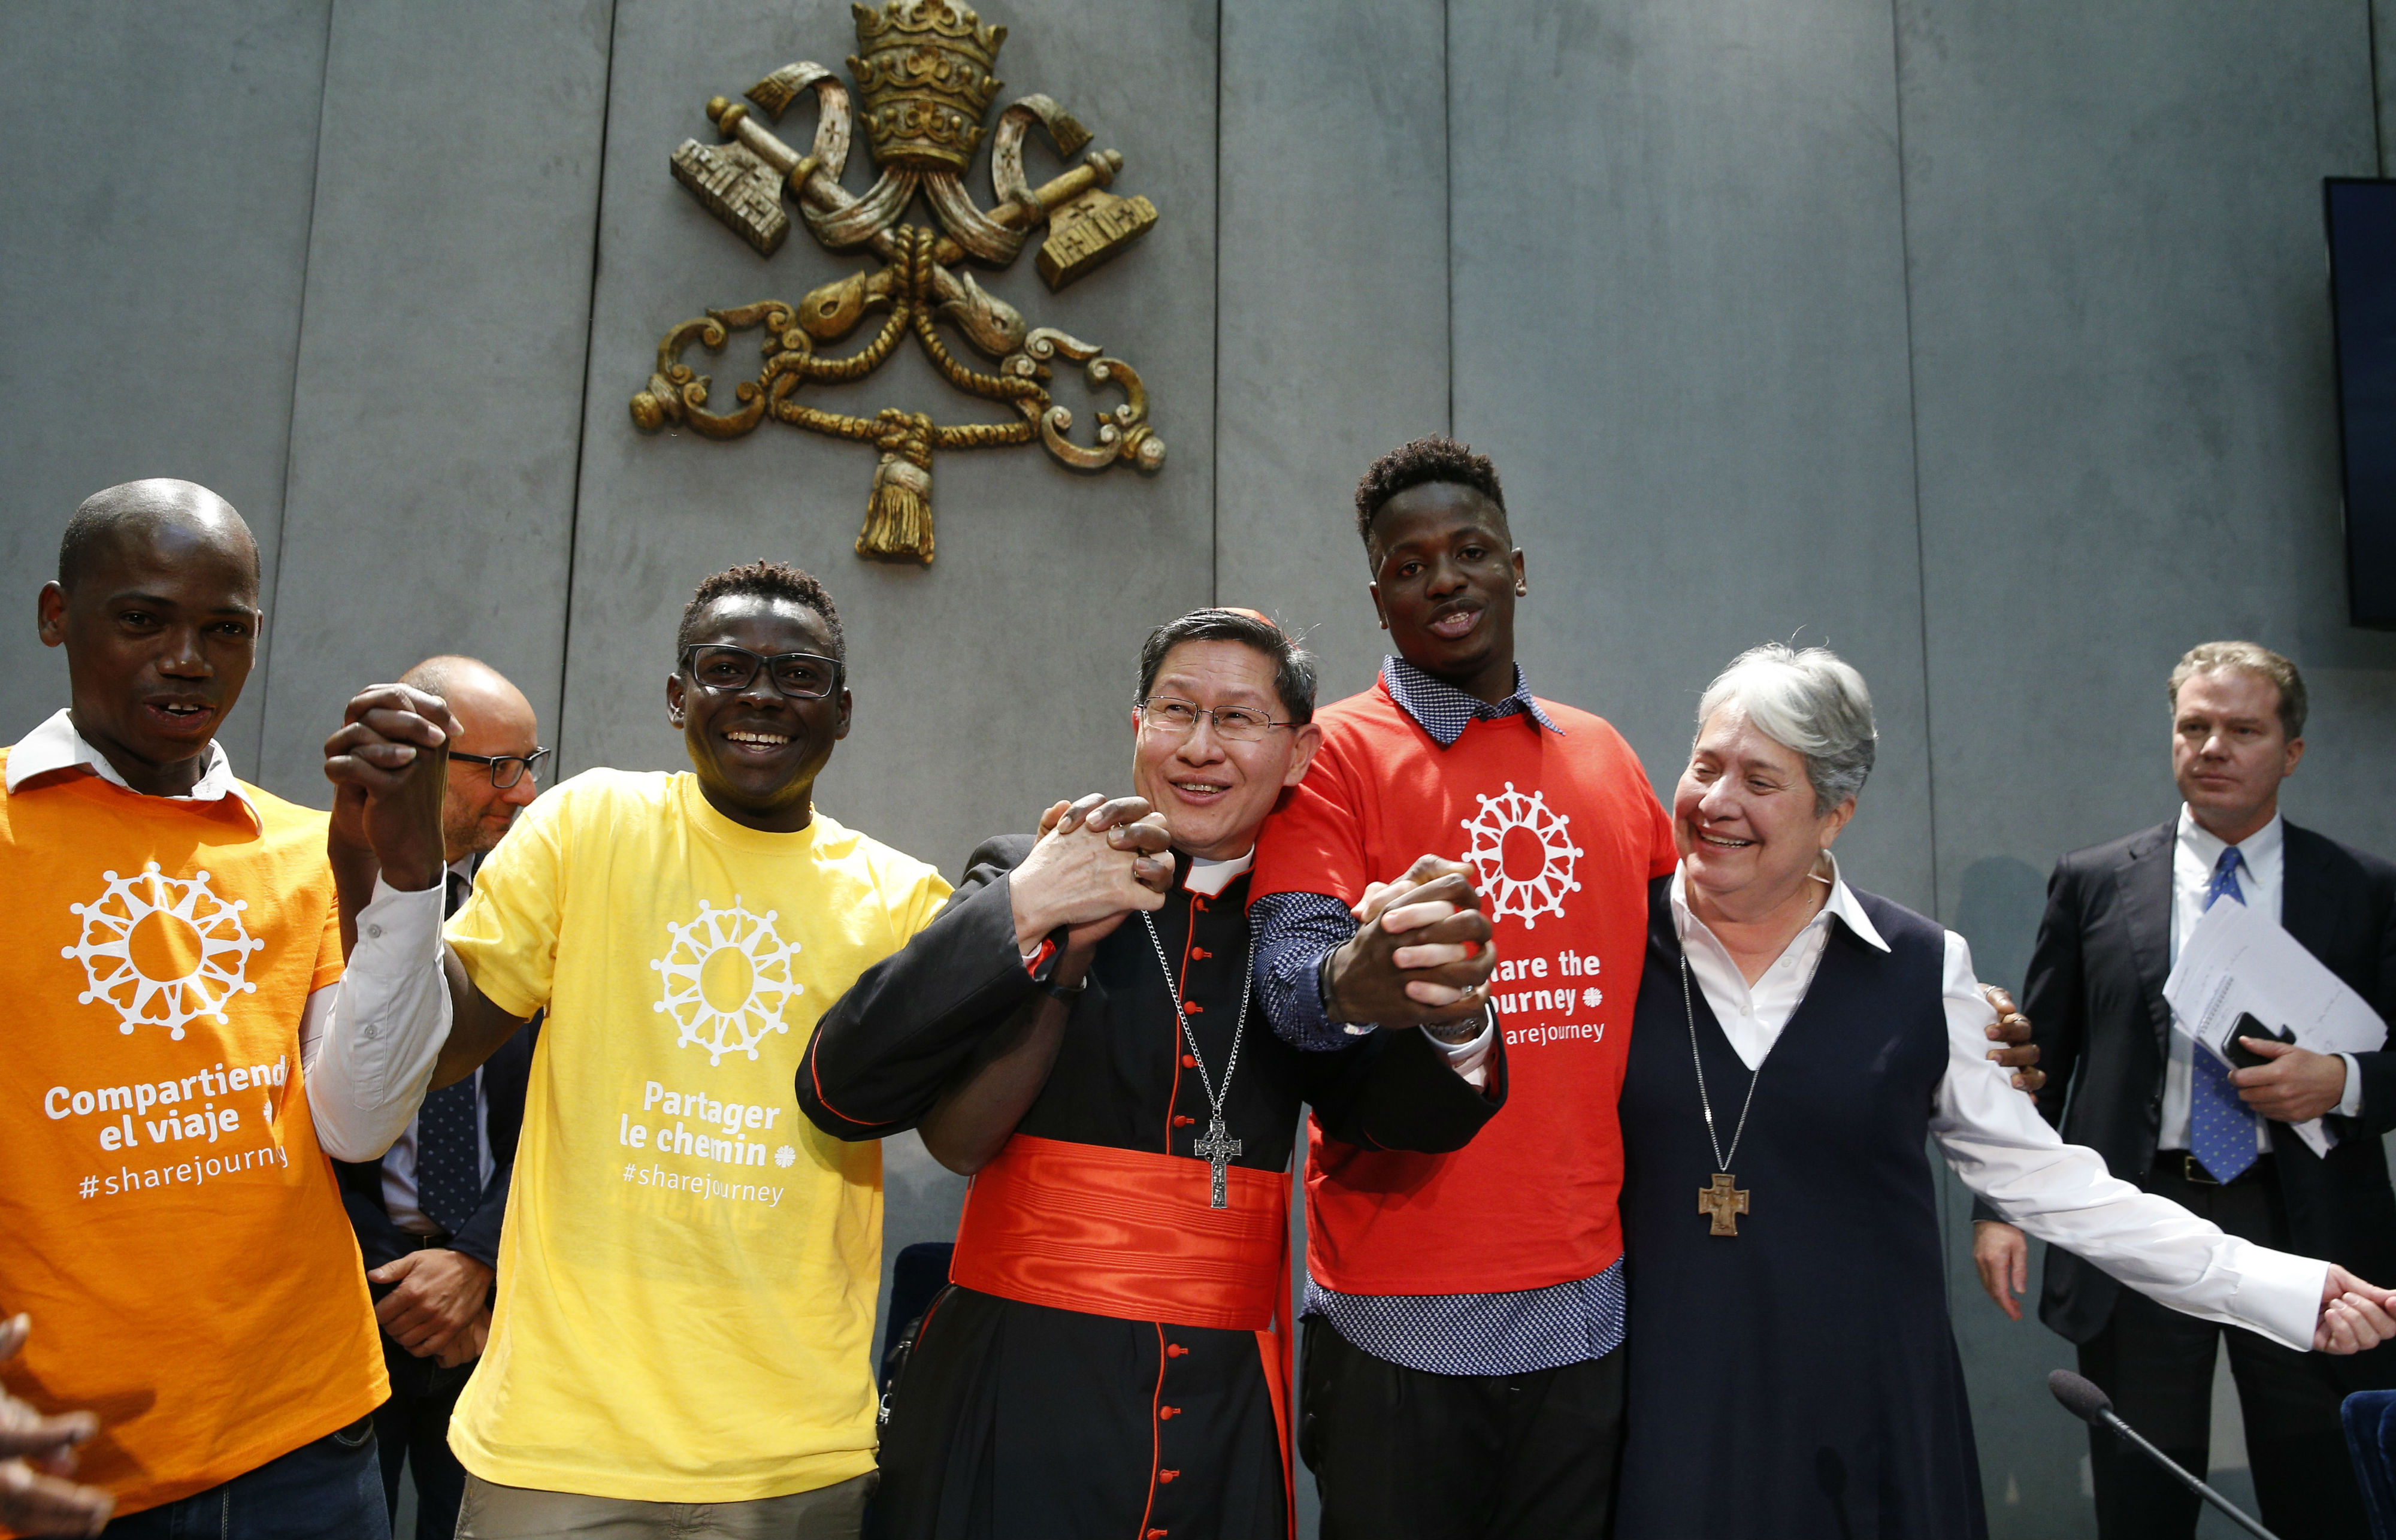 Welcome migrants and refugees, Cardinal Tagle implores world governments at start of new campaign  